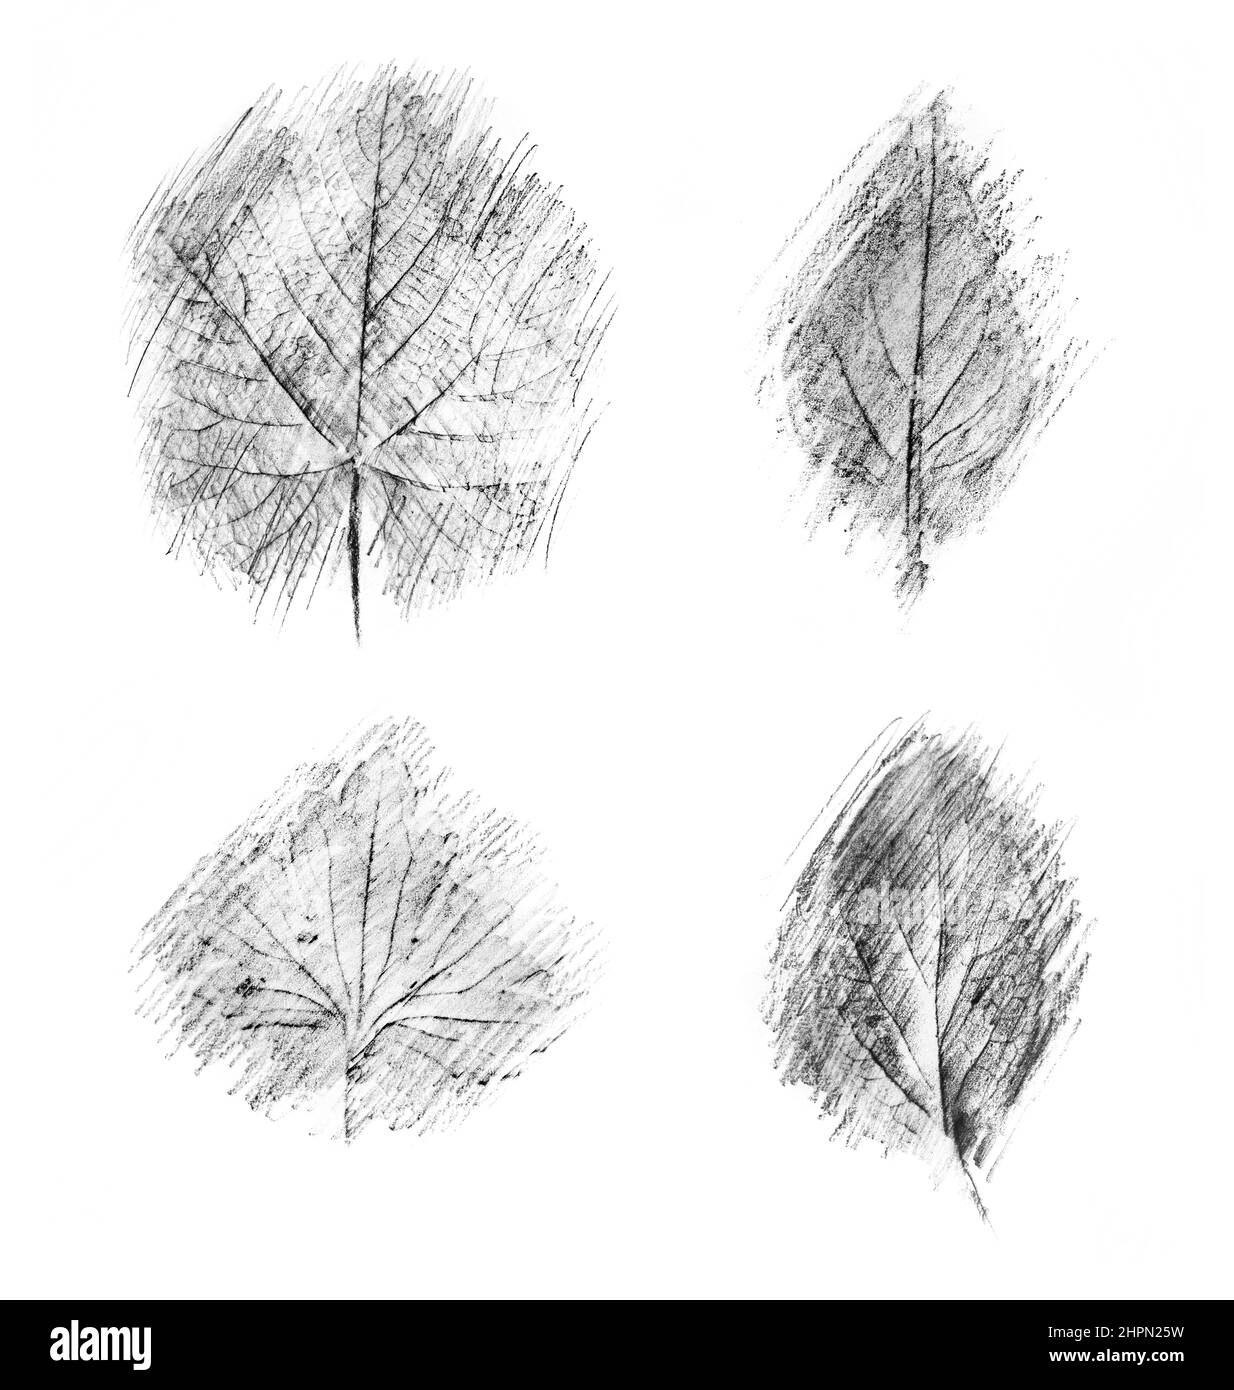 What is your first drawingpencil shading  Quora